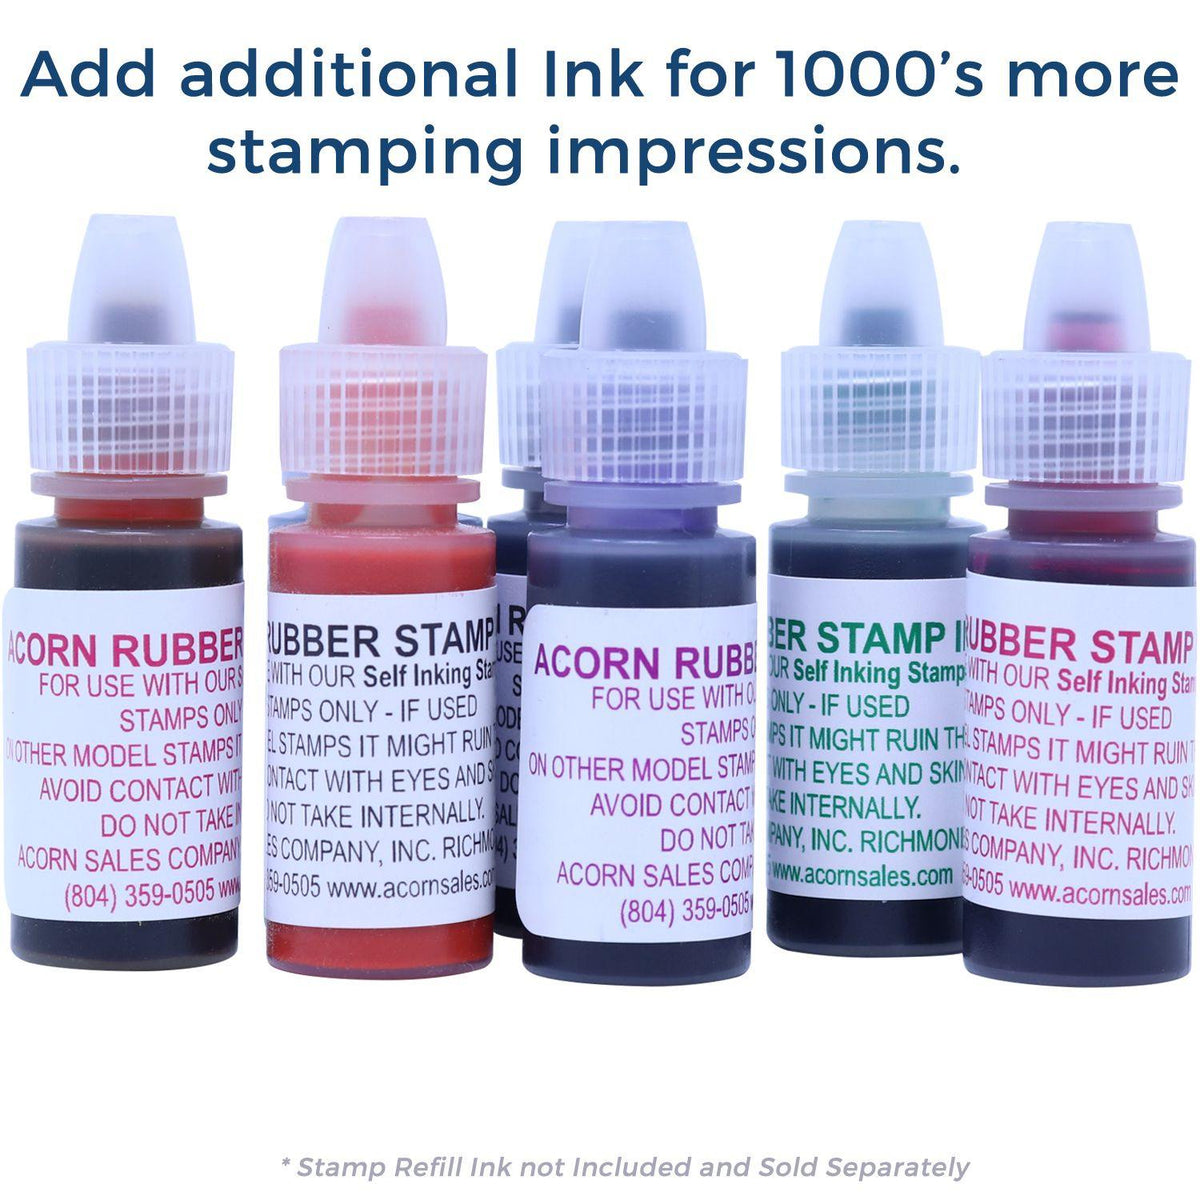 Refill Inks for Large Pre-Inked Devolver Copia Stamp Available